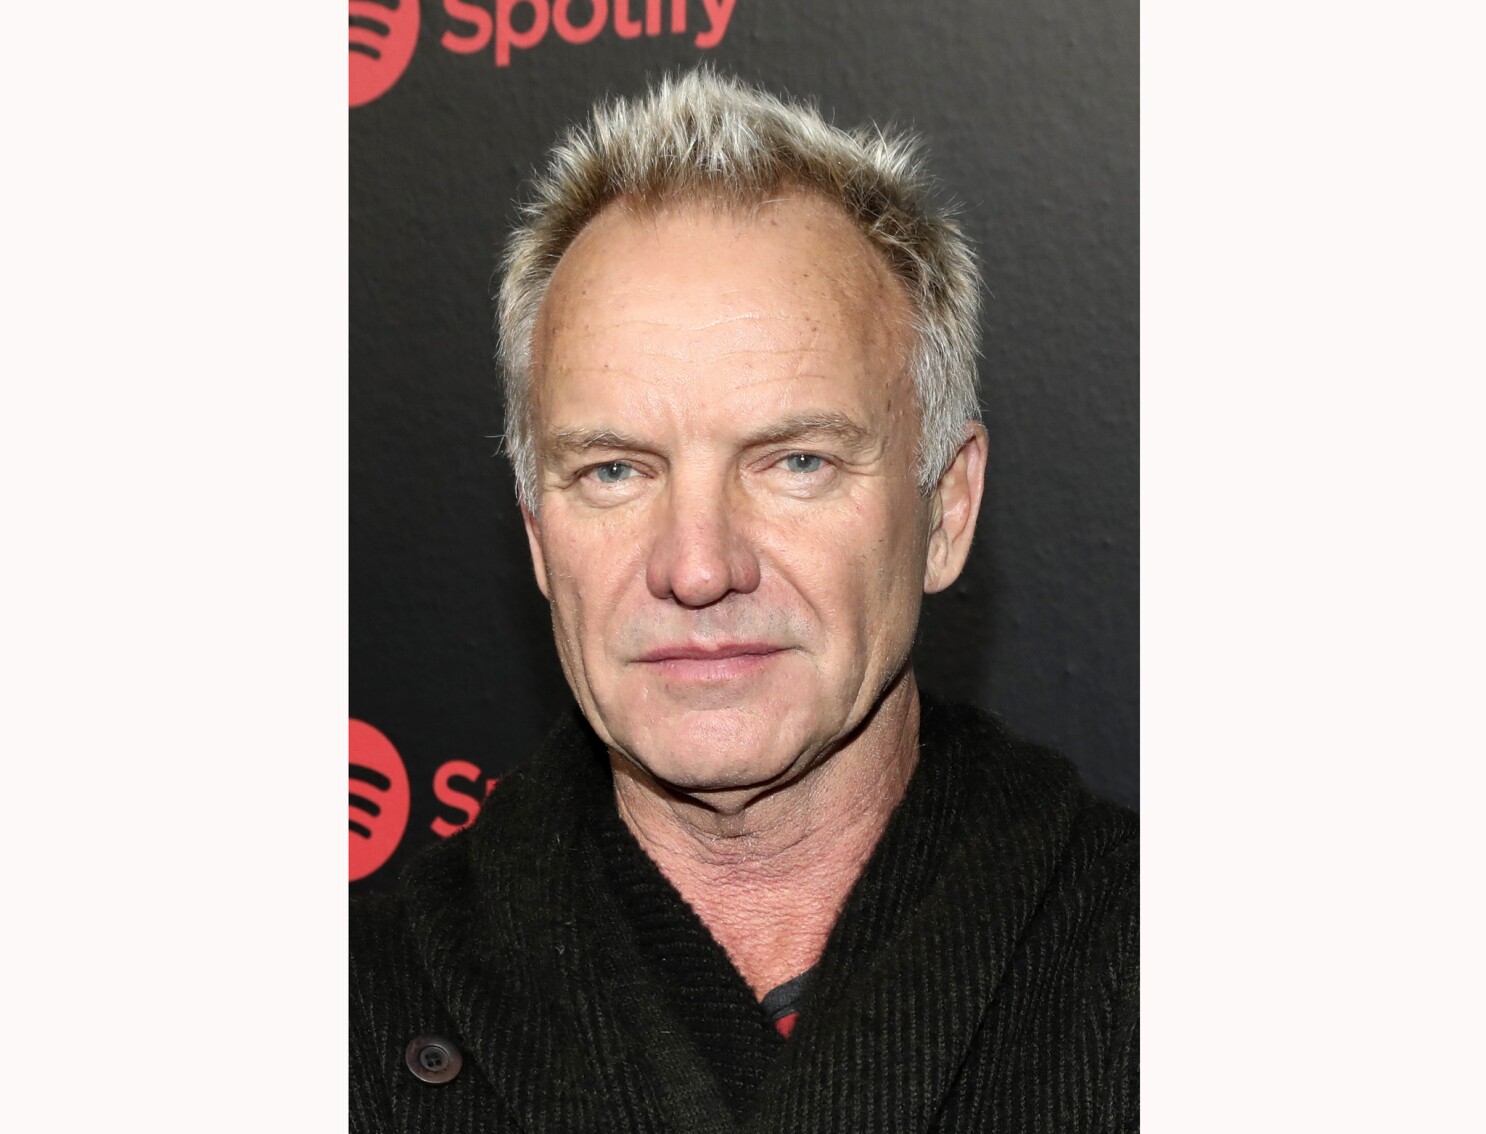 Sting On Las Vegas Residency New Album And Juice Wrld The San Diego Union Tribune - jill and juice roblox song